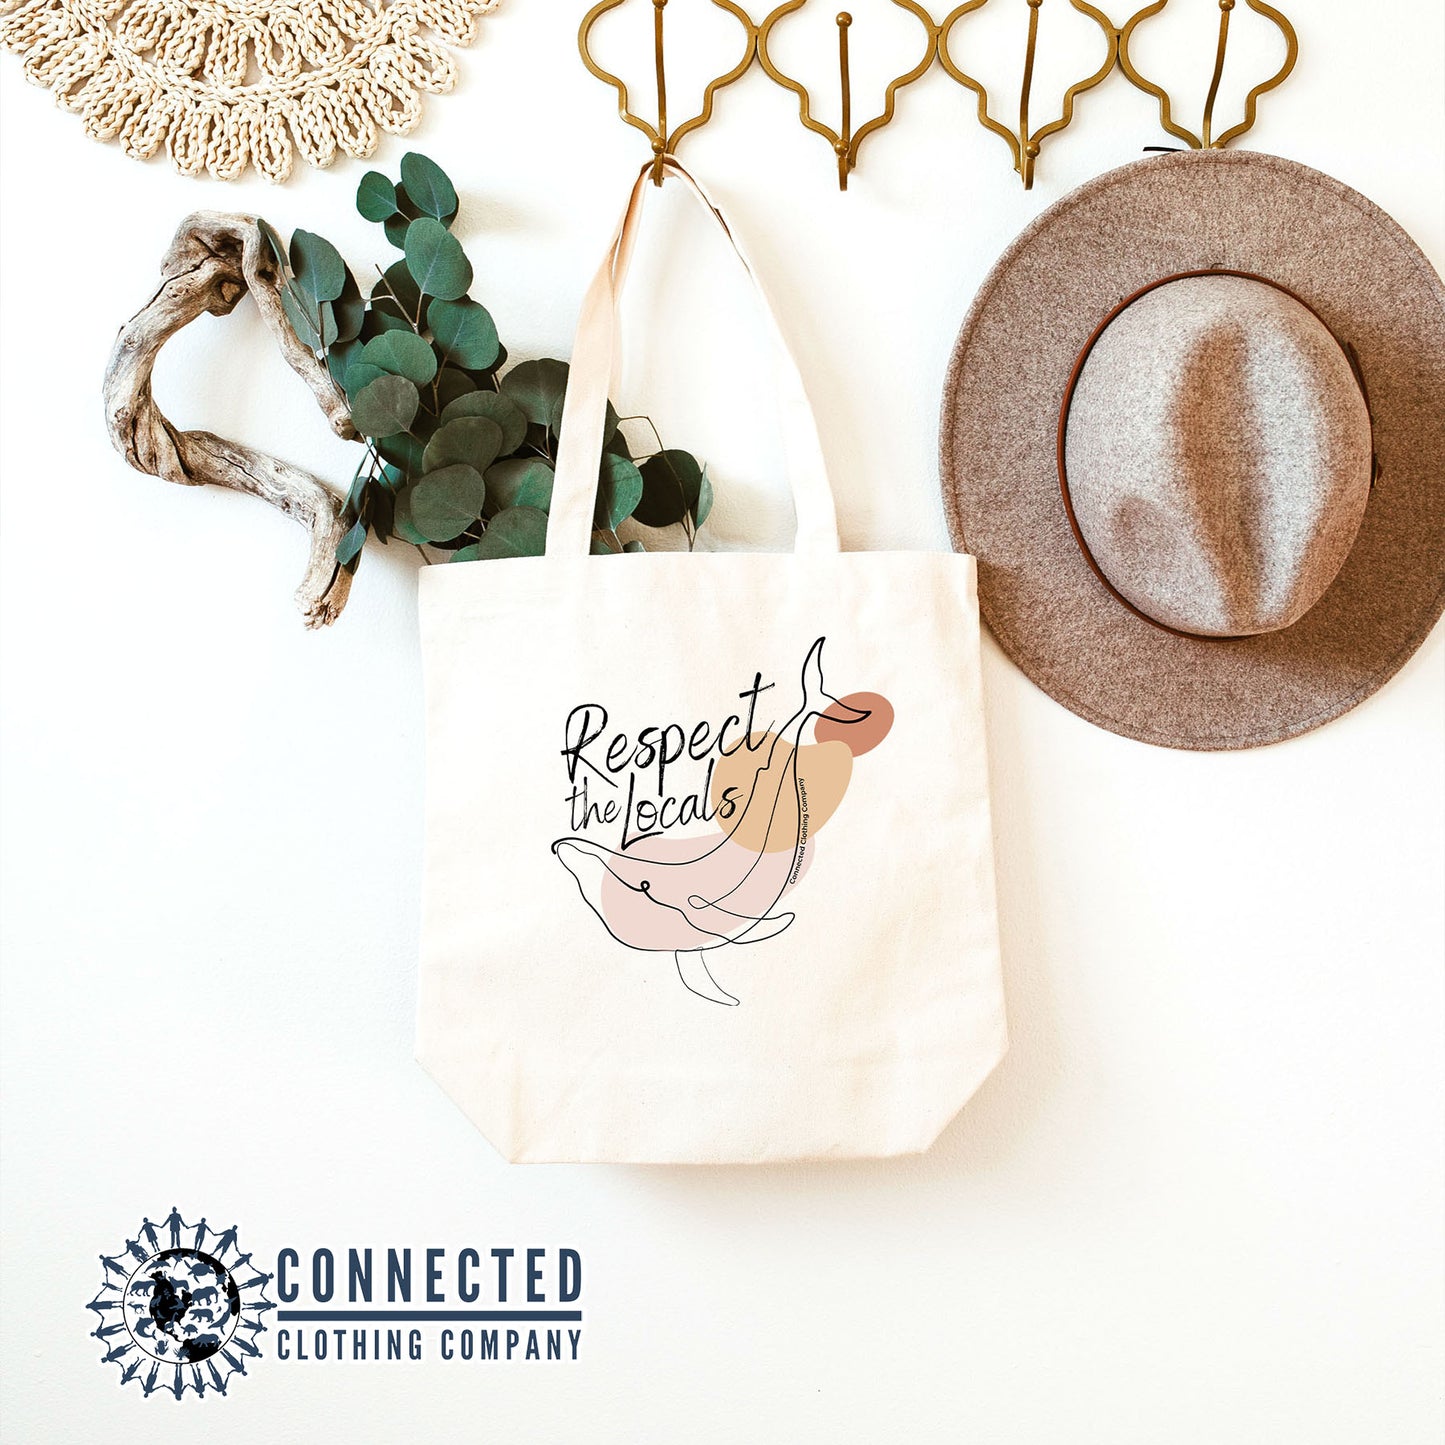 Respect The Locals Whale Tote Bag - Connected Clothing Company - 10% of proceeds are donated to ocean conservation